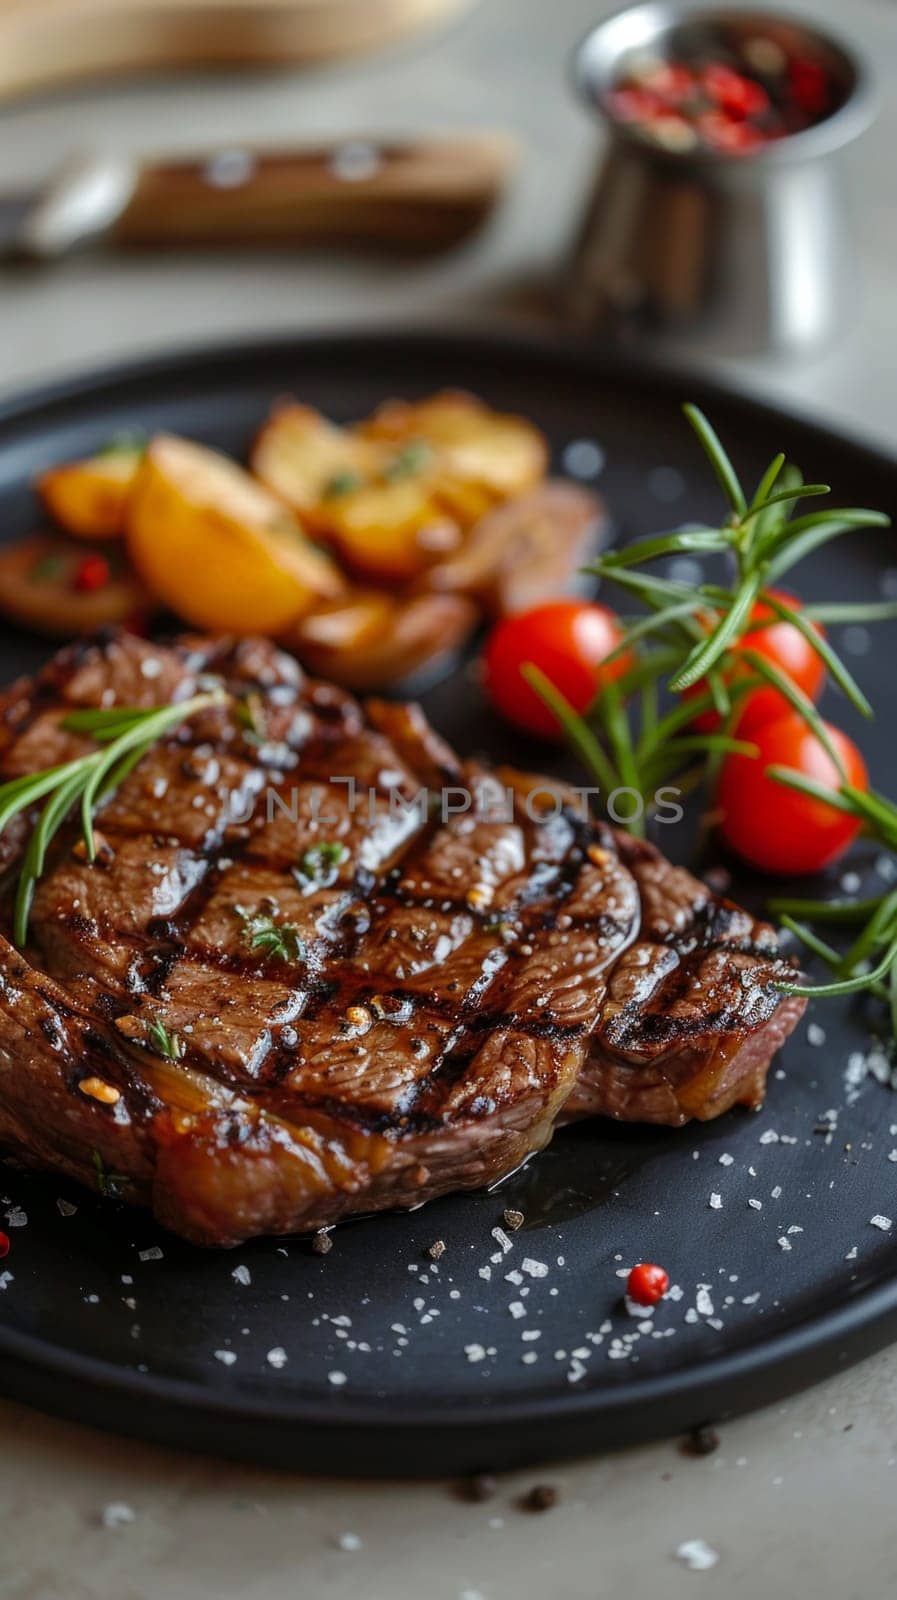 Gourmet steak delight: A beautifully cooked sirloin with rosemary on a rustic wooden board.